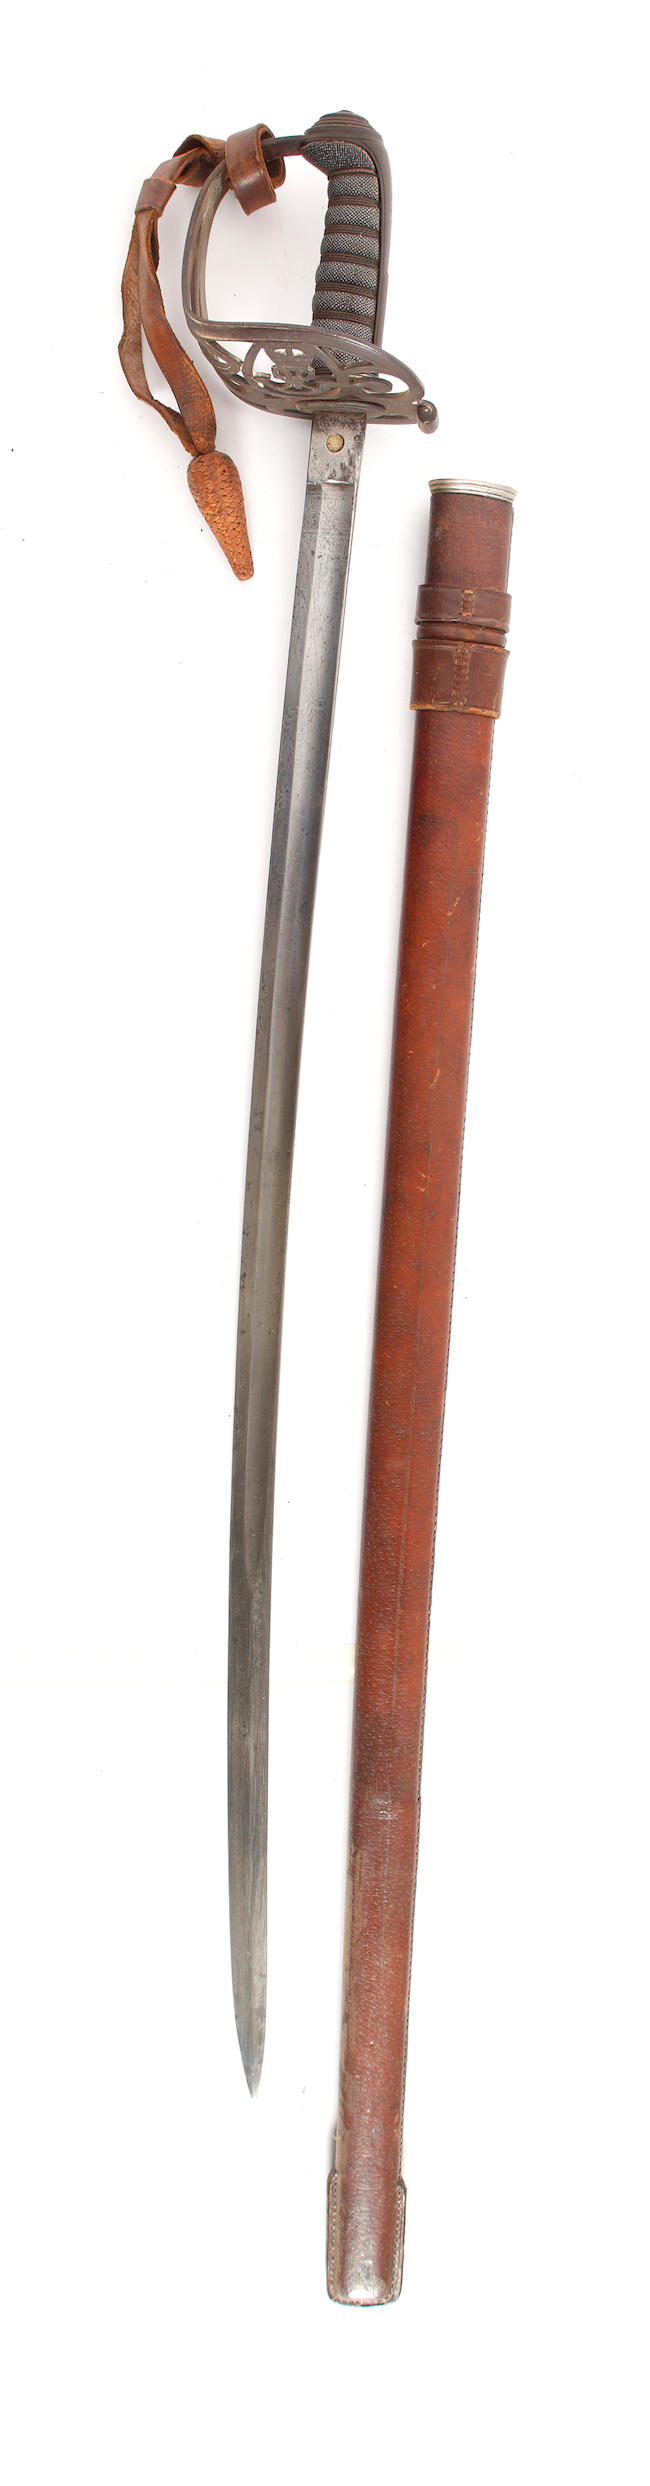 A Rifle Officer's Sword